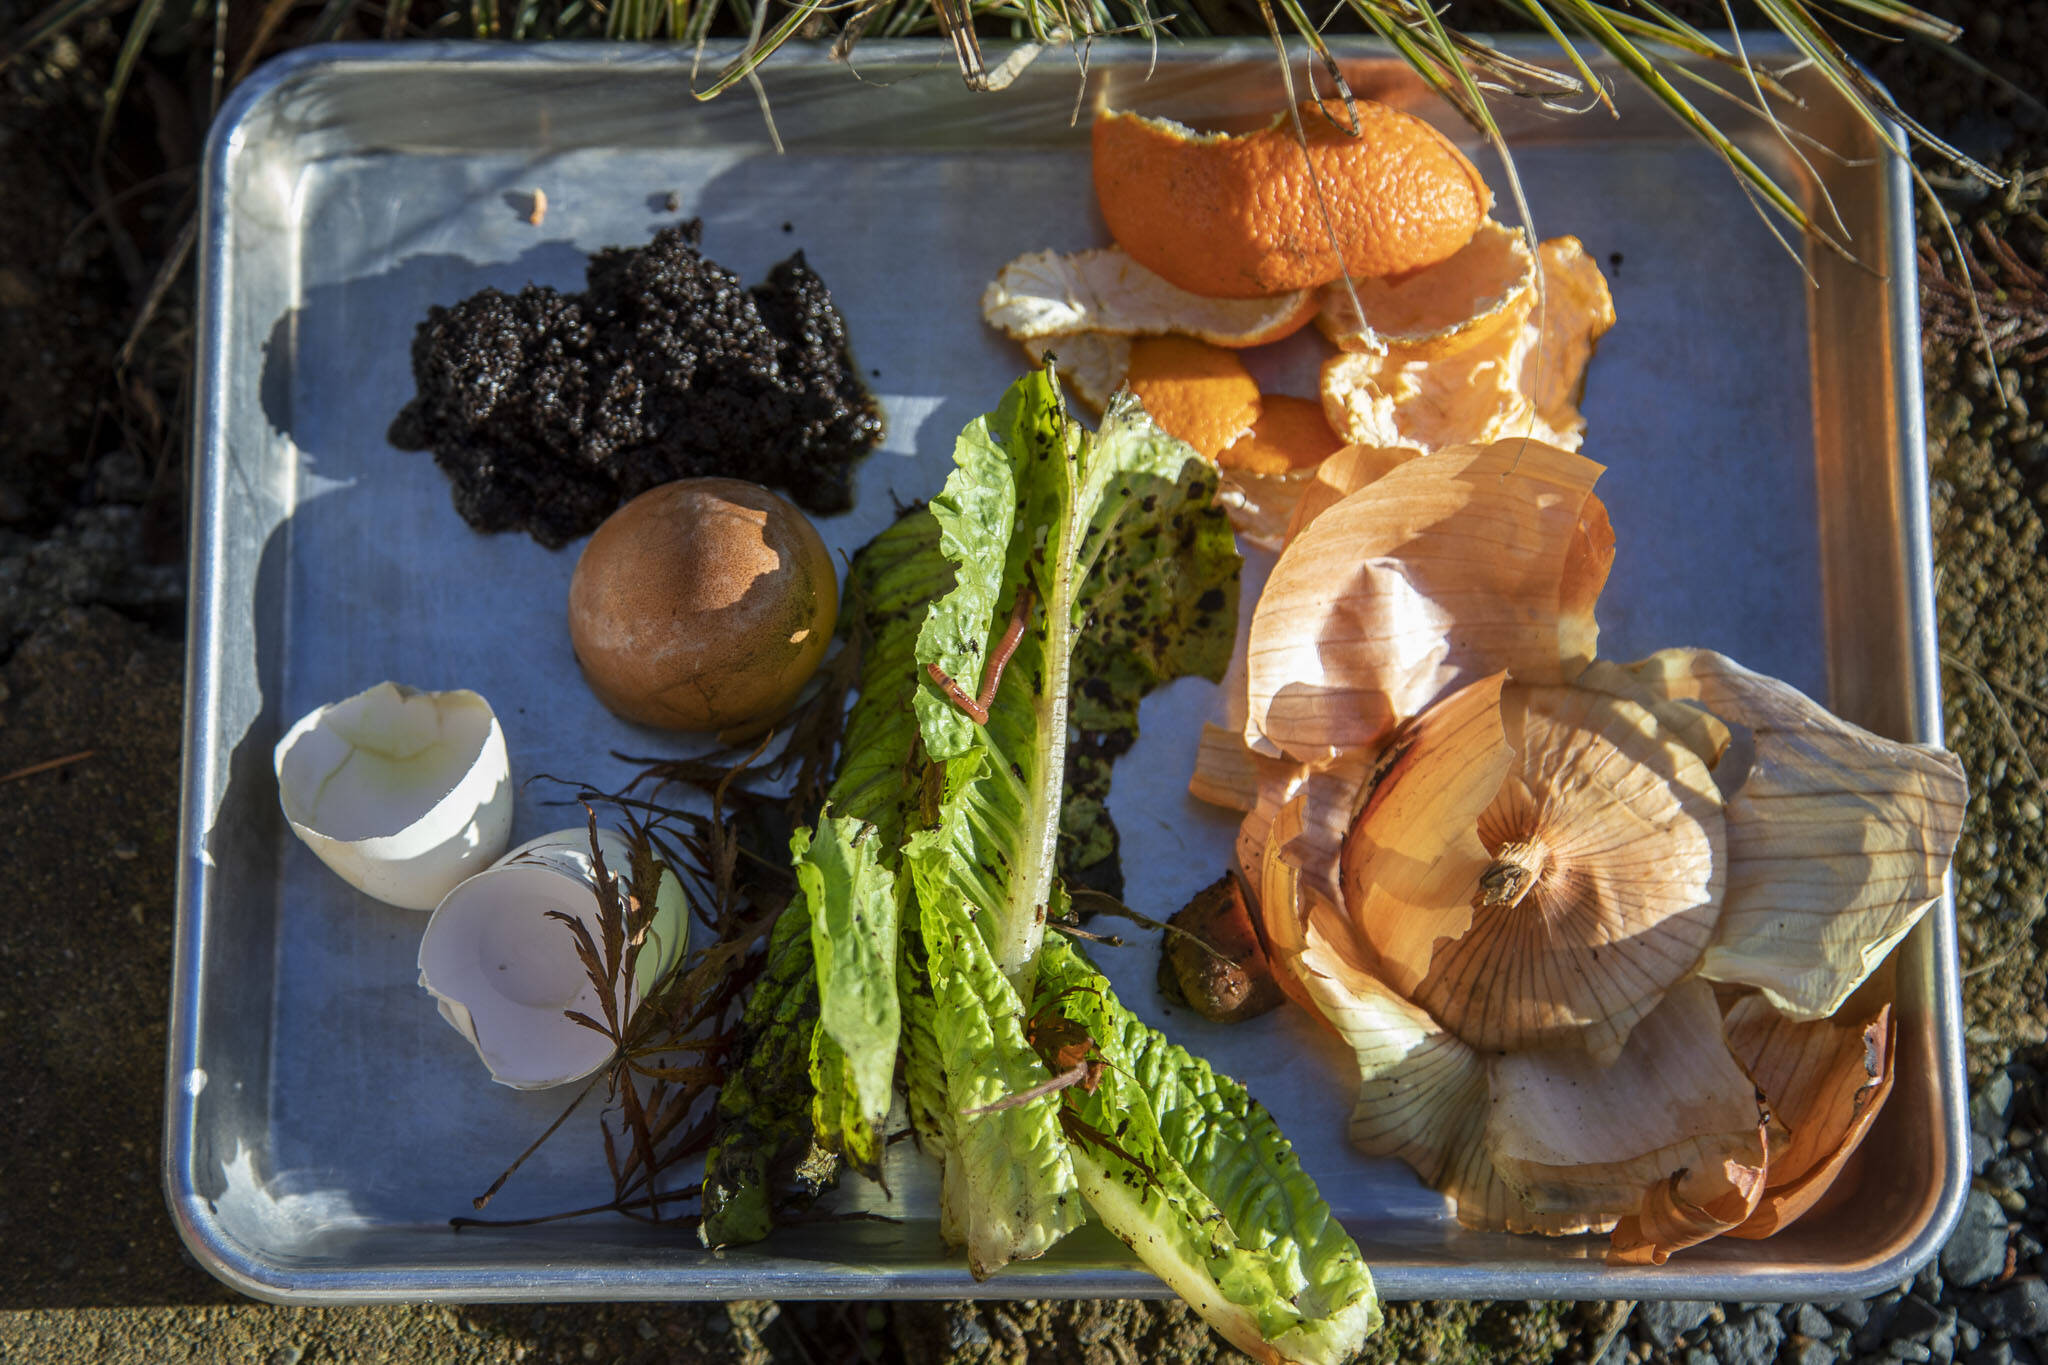 DIY composting puts table scraps to good use